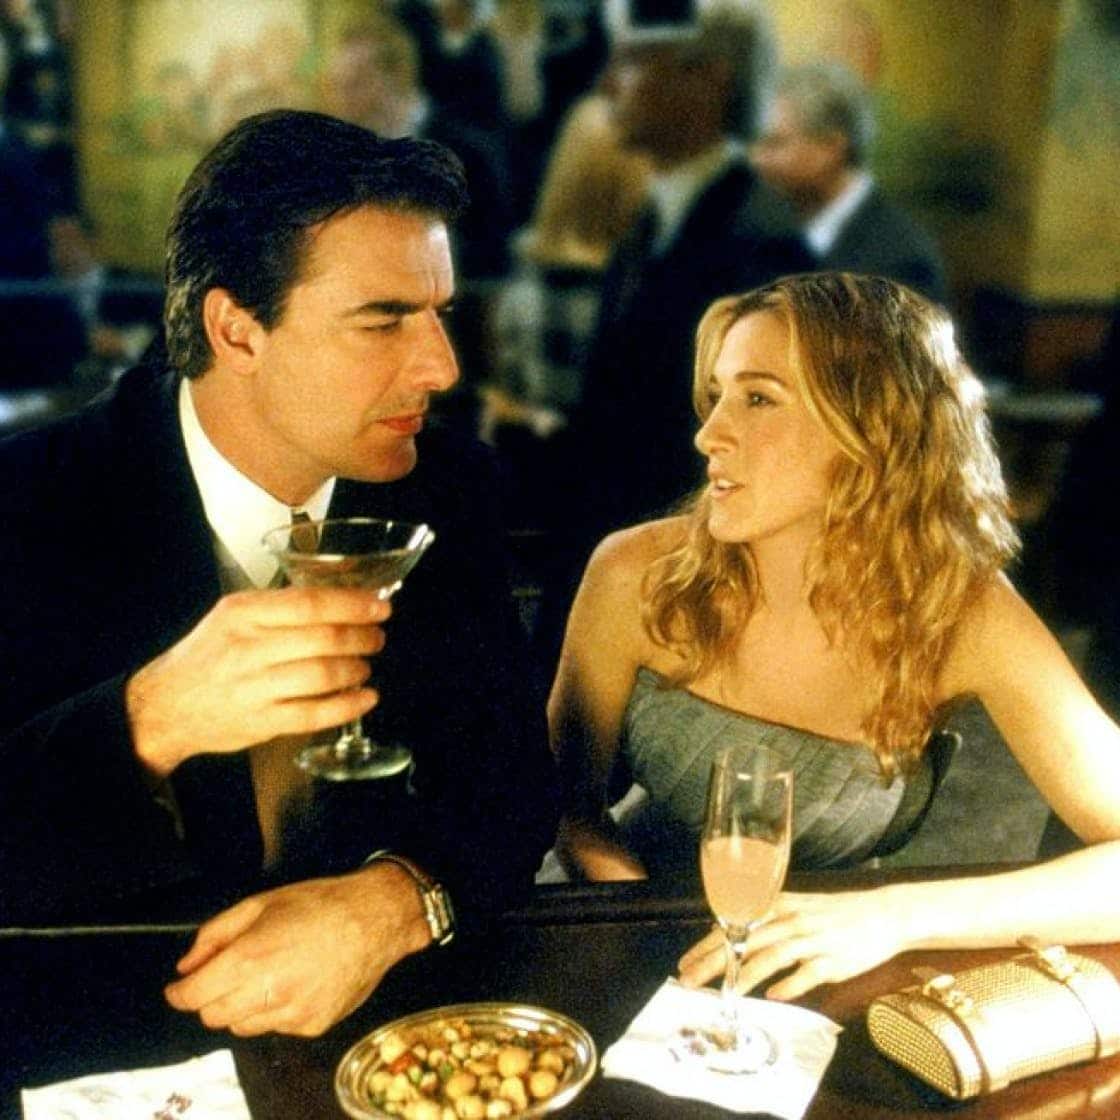 CARRIE BRADSHAW-MR. BIG- SEX AND THE CITY STARCAST